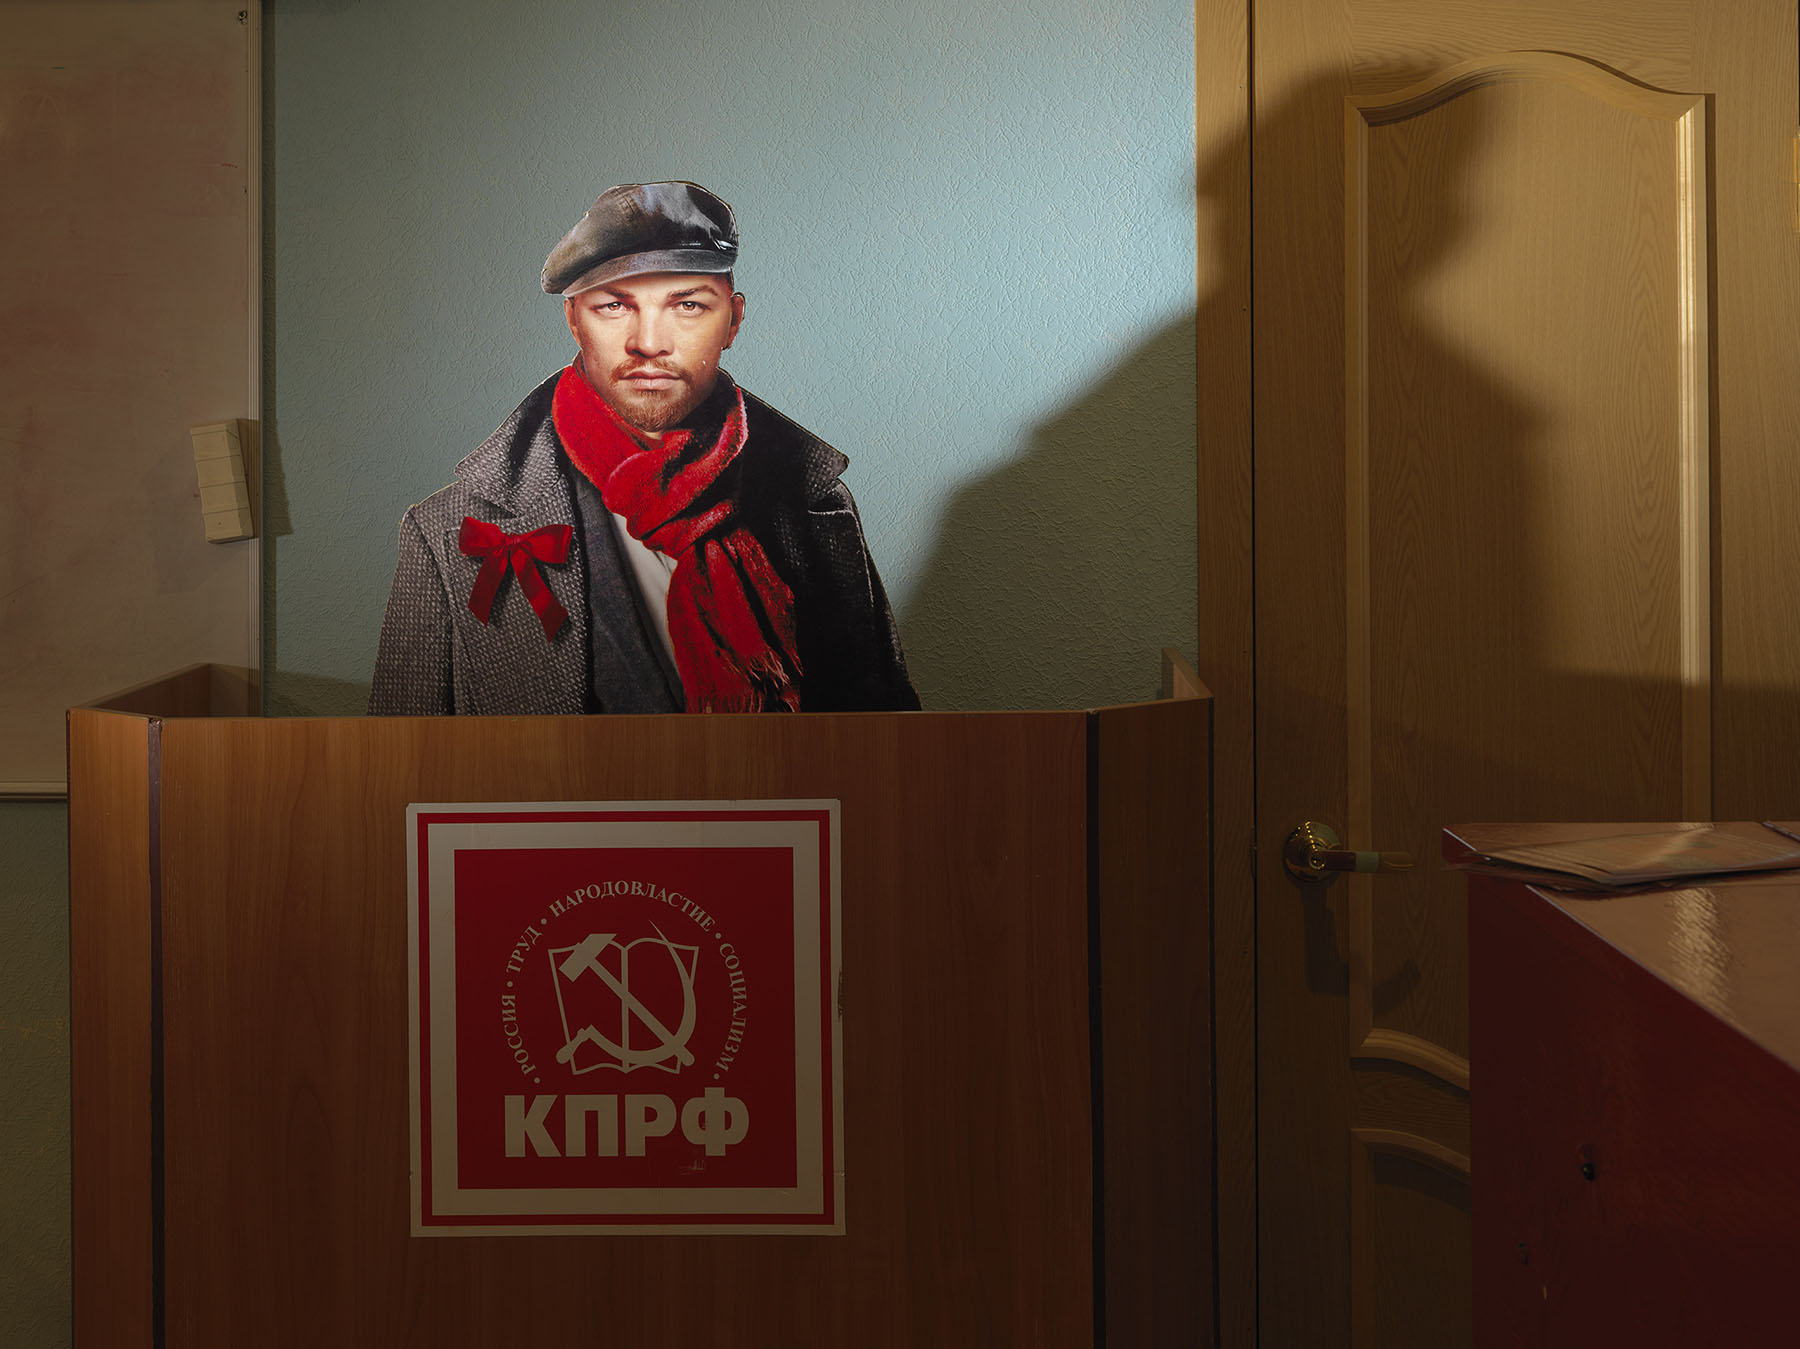 Communism, Russia. Communist Party of the Russian Federation: Tsentralni district committee office (raikom) in St Petersburg, Leningrad province.